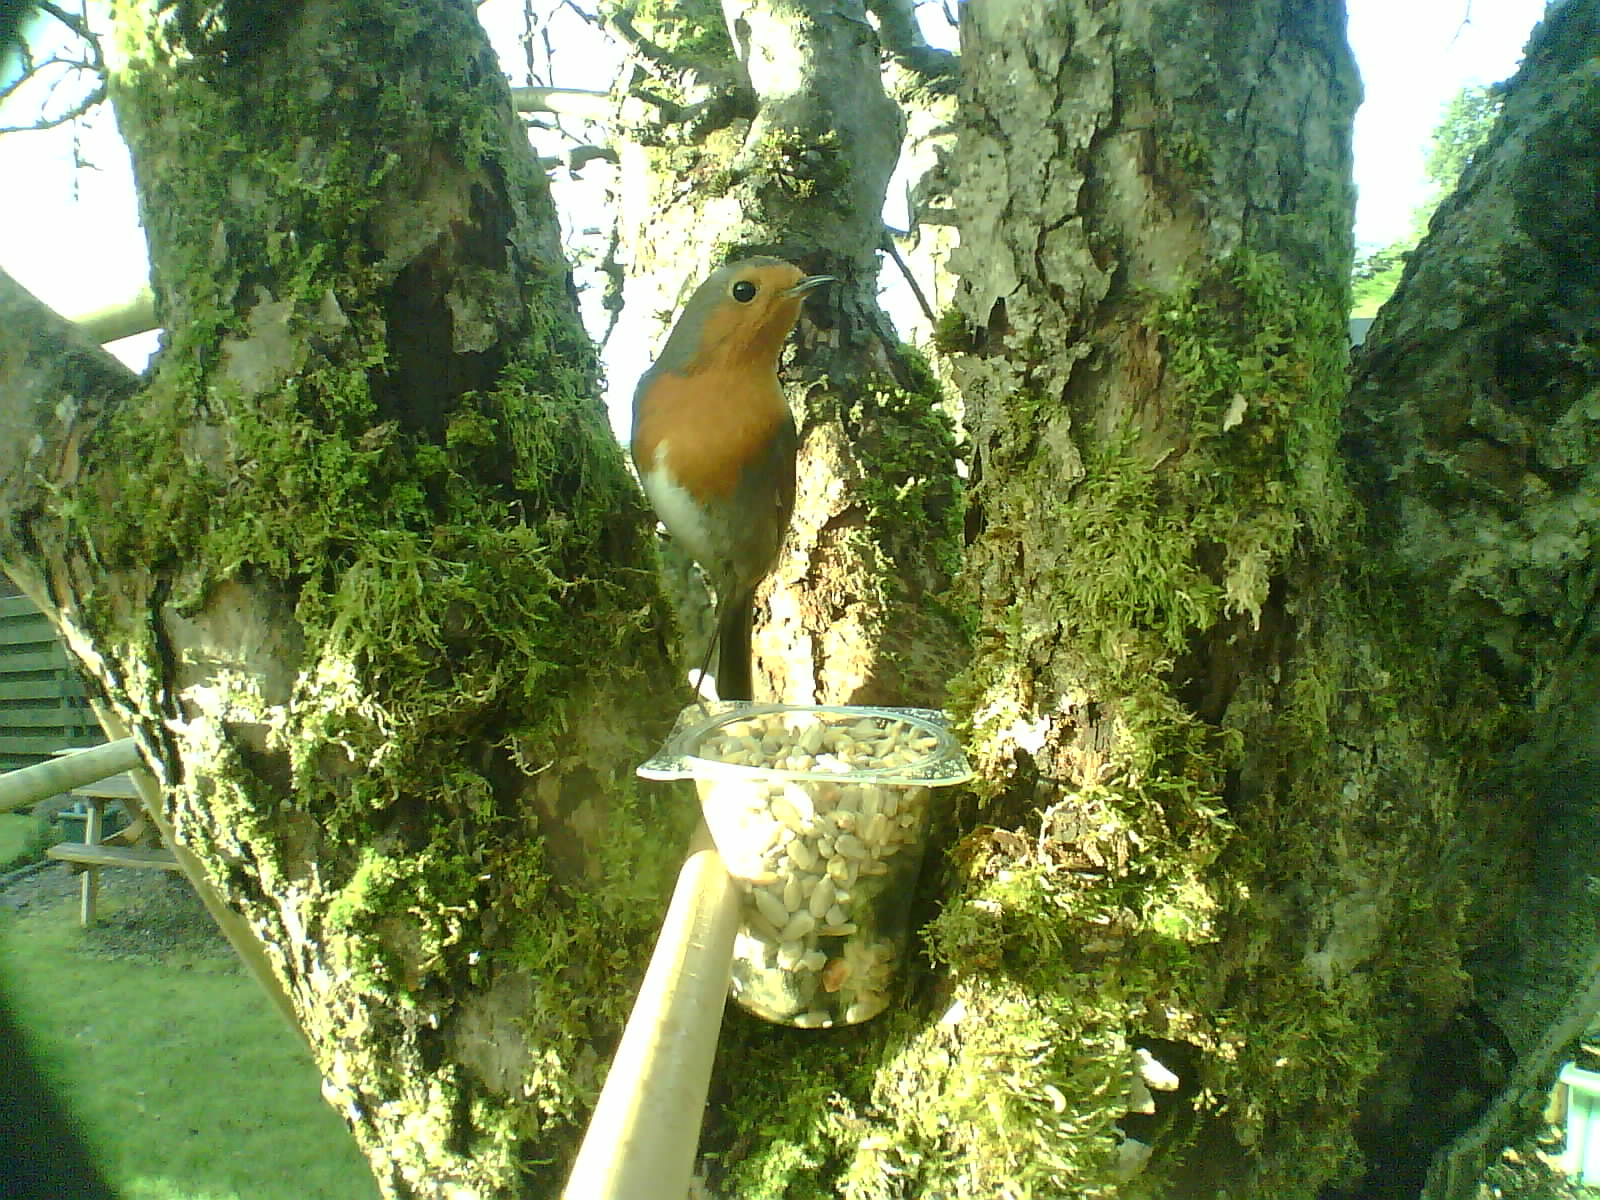 Robin holding on to a vertical tree branch